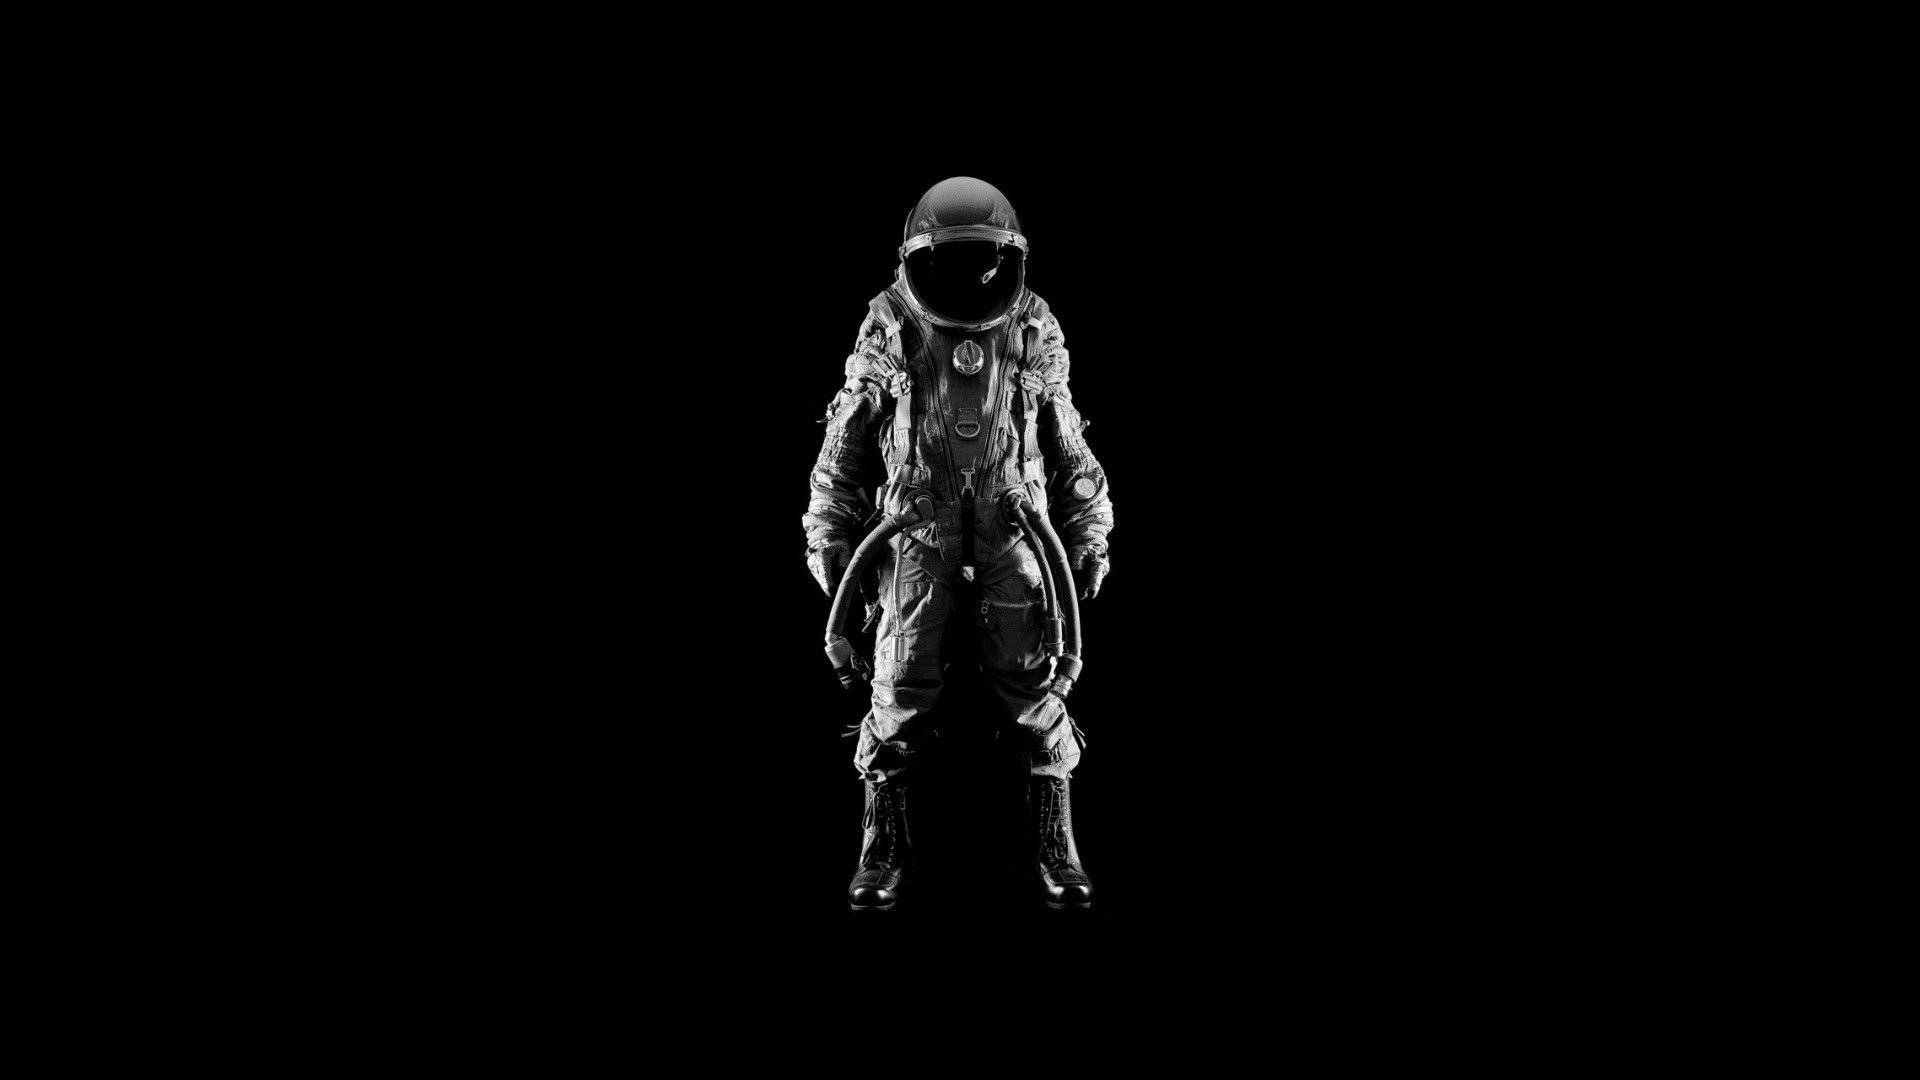 Astronaut Aesthetic In White Suit Background